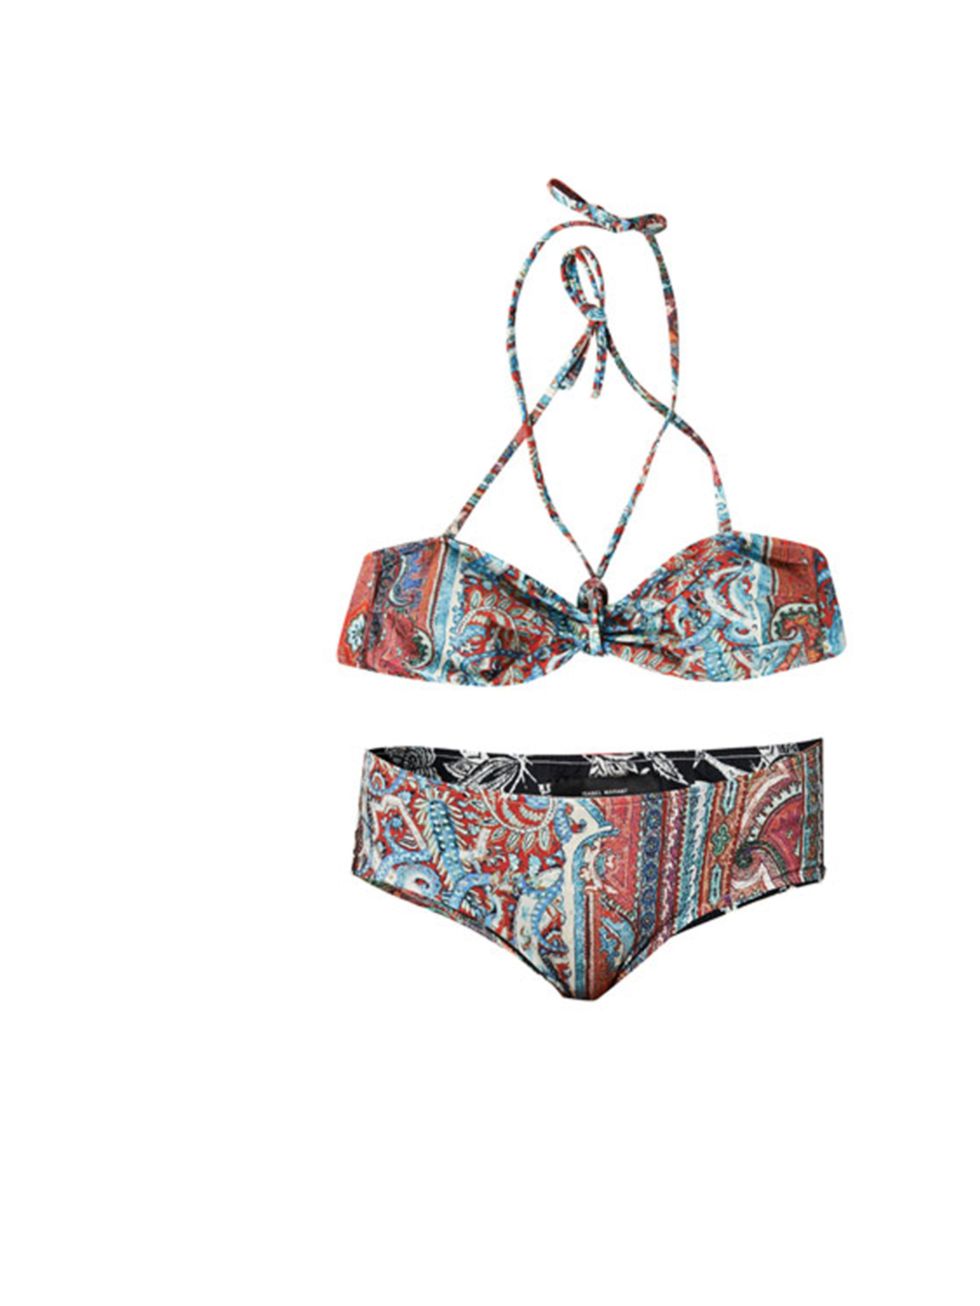 <p>Dreaming of your summer holiday? Then now is the time to invest in your new bikini  the best ones are in stores now and like this Isabel Marant set, they wont be around for long... Isabel Marant reversible bikini, £205, at Matches</p><p><a href="http